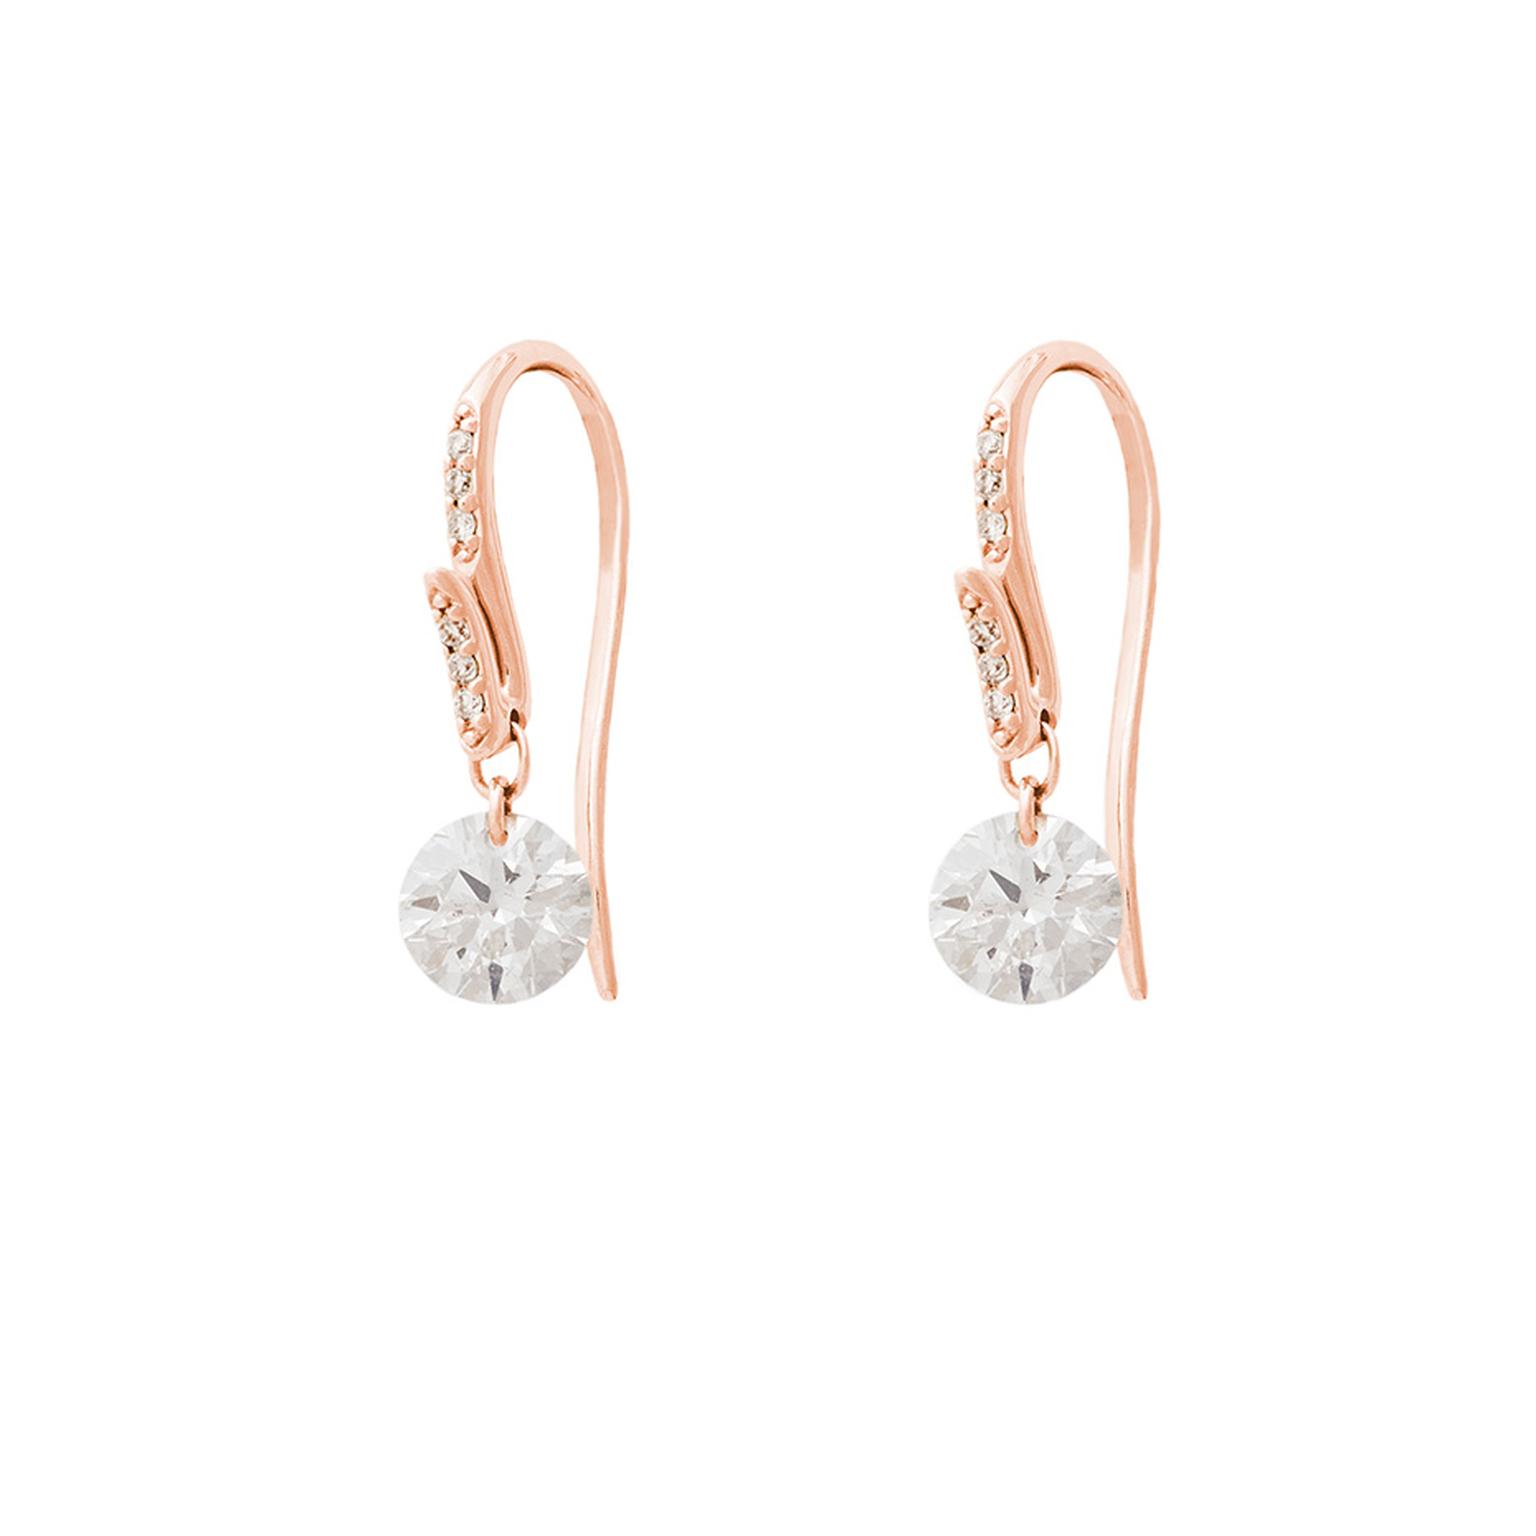 Raphaele Canot Set Free Diamonds collection pink gold and pavé diamond earrings featuring two brilliant-cut diamonds suspended from the centre